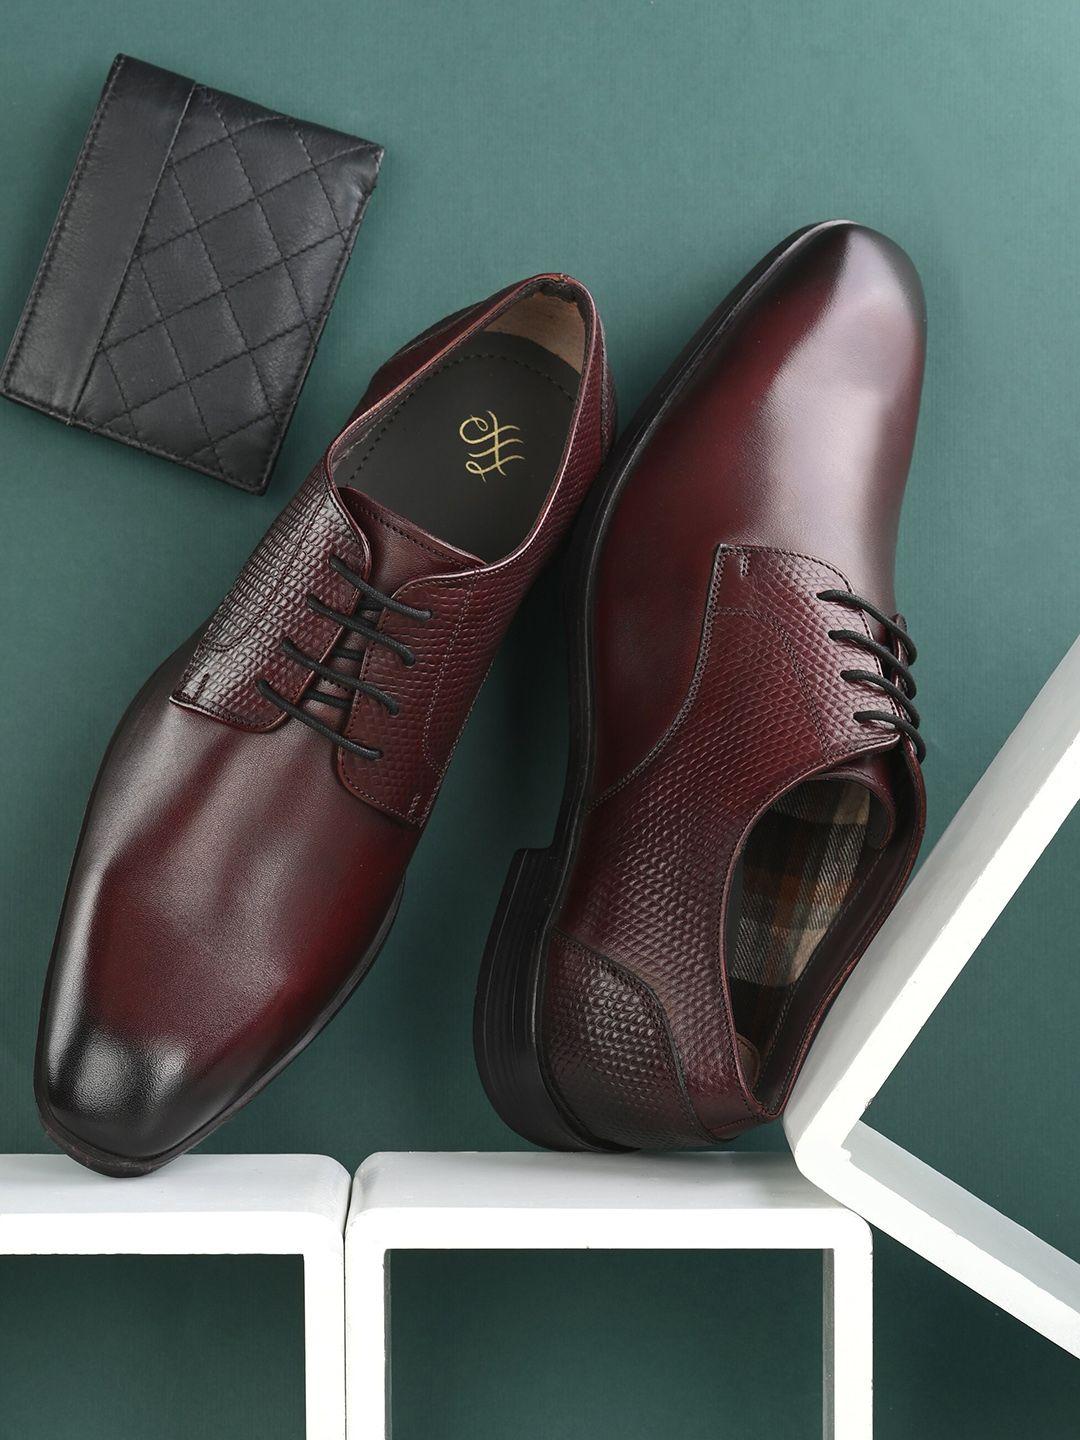 house of pataudi men leather formal derbys shoes